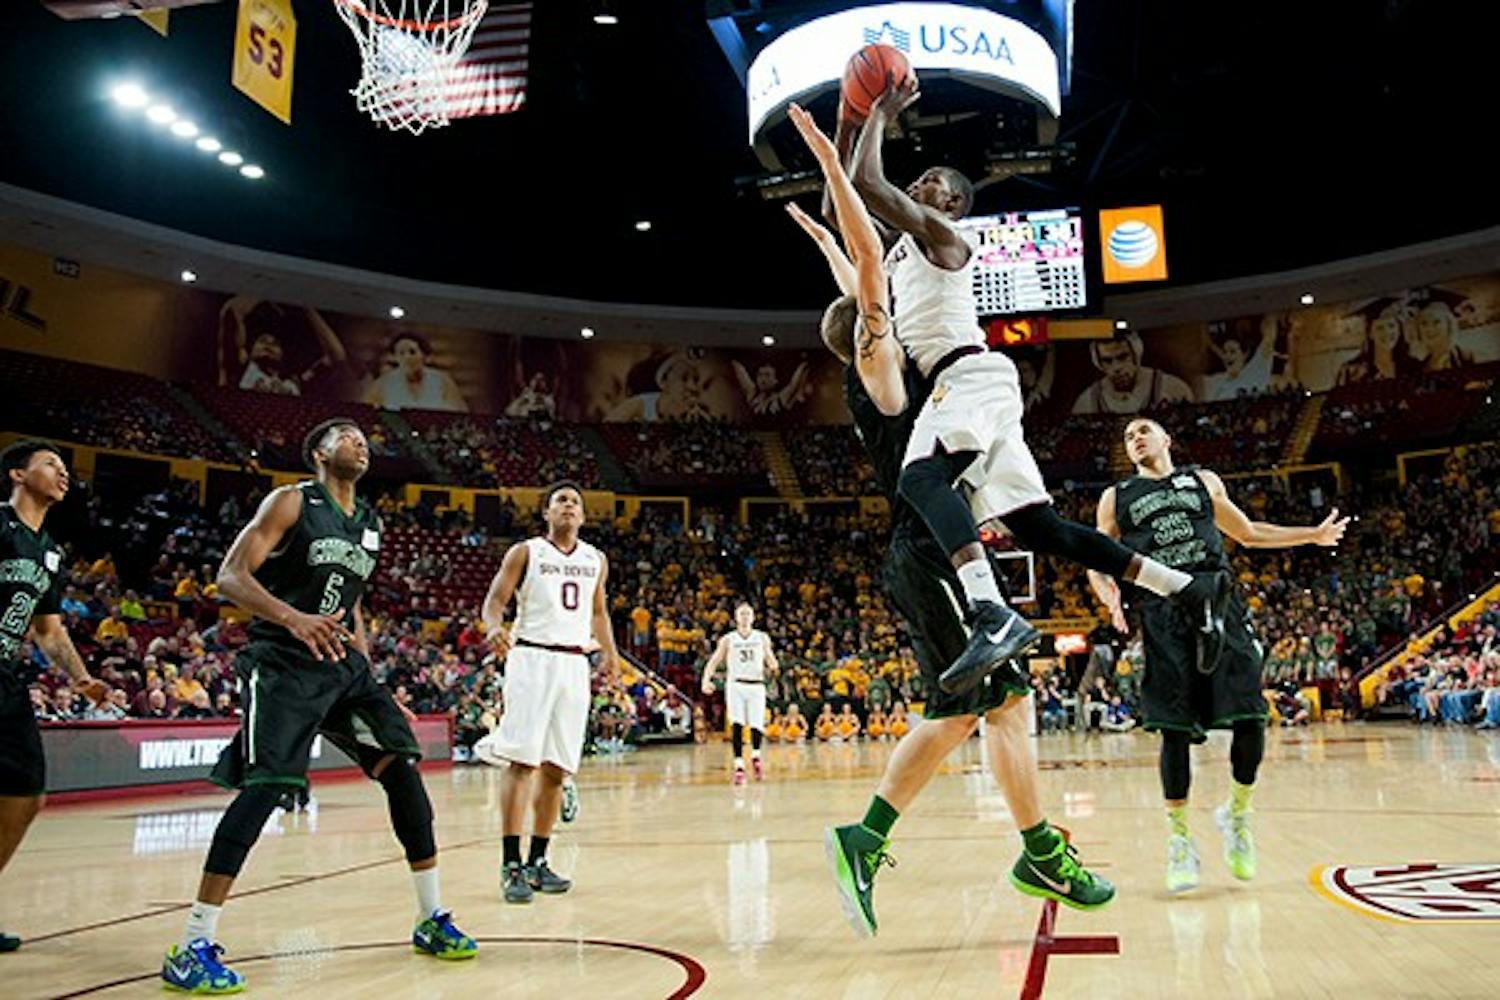 Junior guard Gerry Blakes goes up for a layup in a game against Chicago State, Friday. Nov. 14, 2014 at Wells Fargo Arena in Tempe. The Sun Devils defeated the Cougars 81-67. (Photo by Ben Moffat)